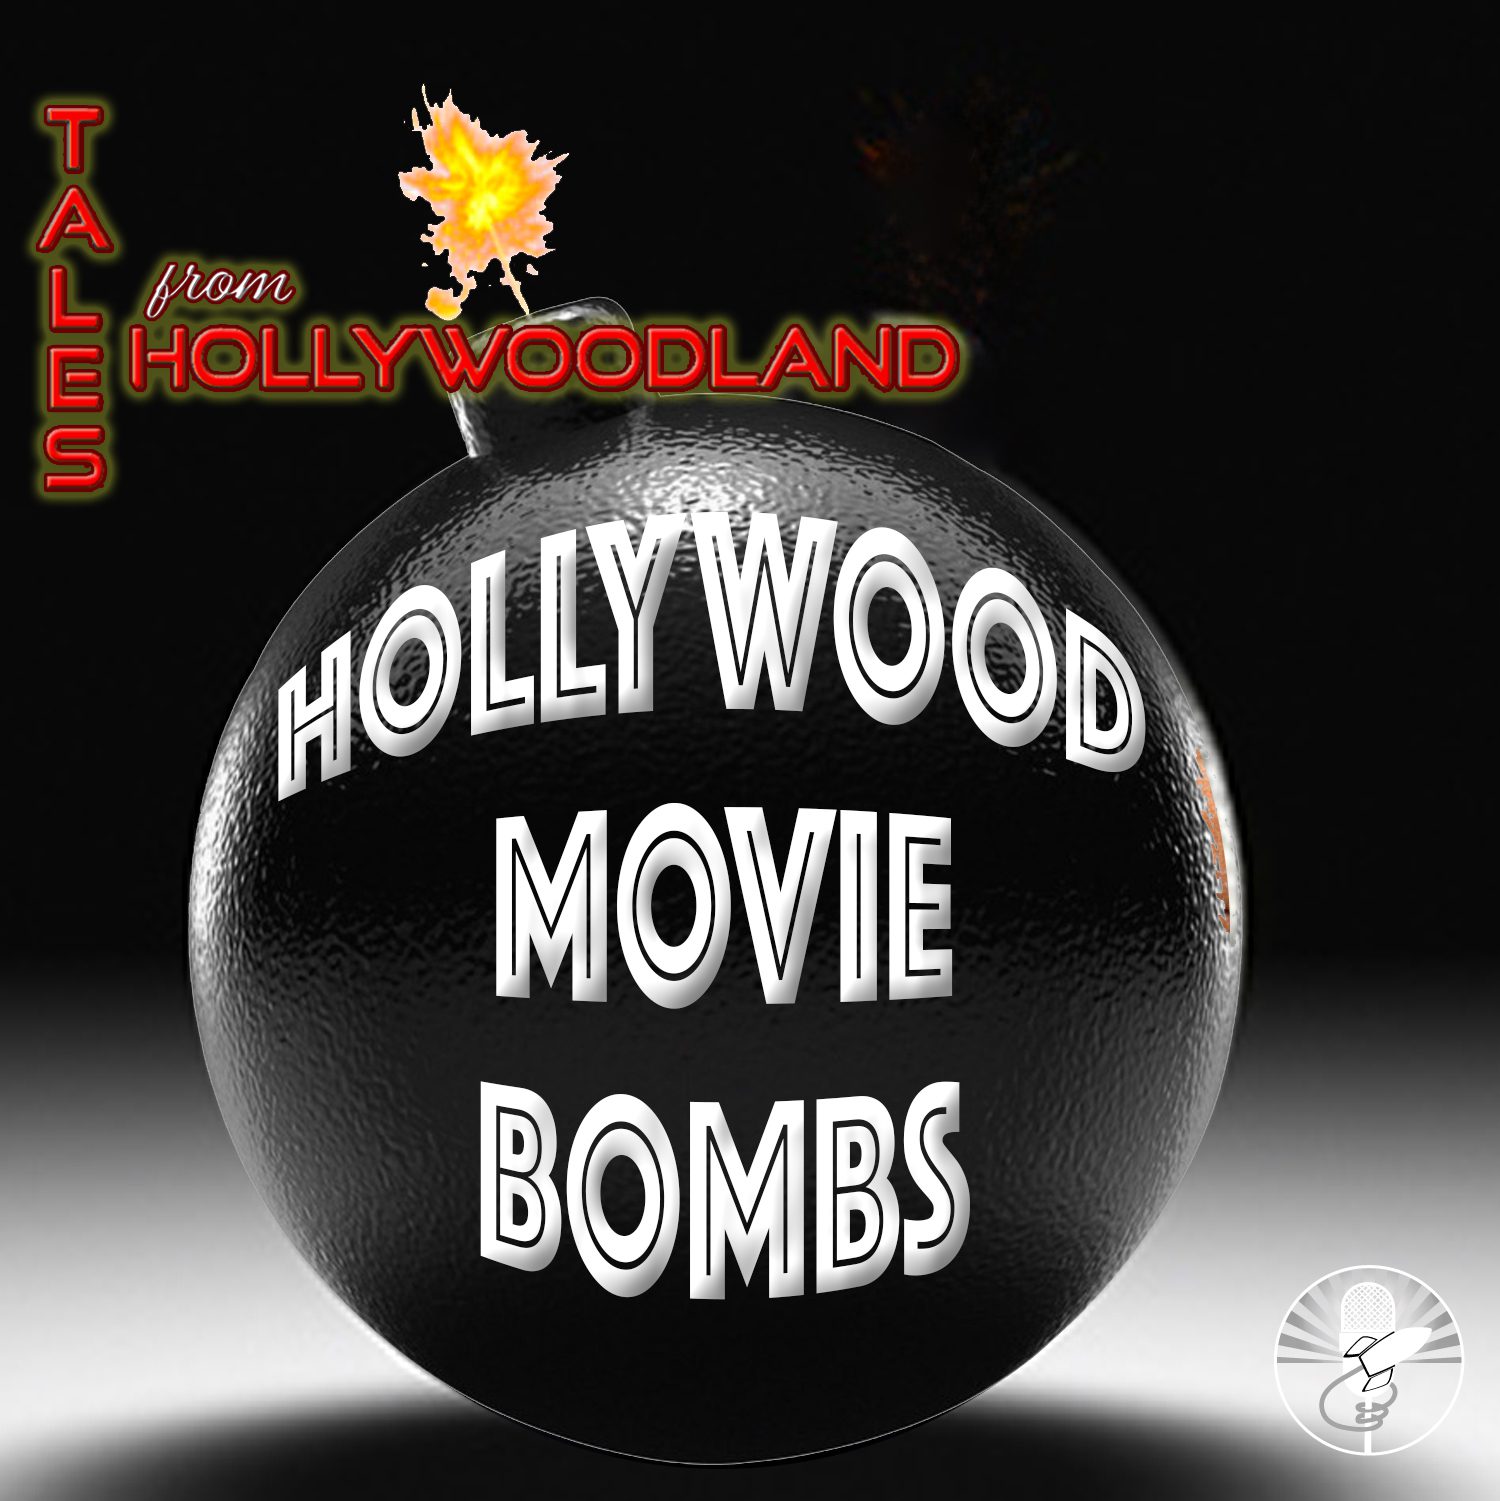 Tales From Hollywoodland, Hollywood Movie Bombs